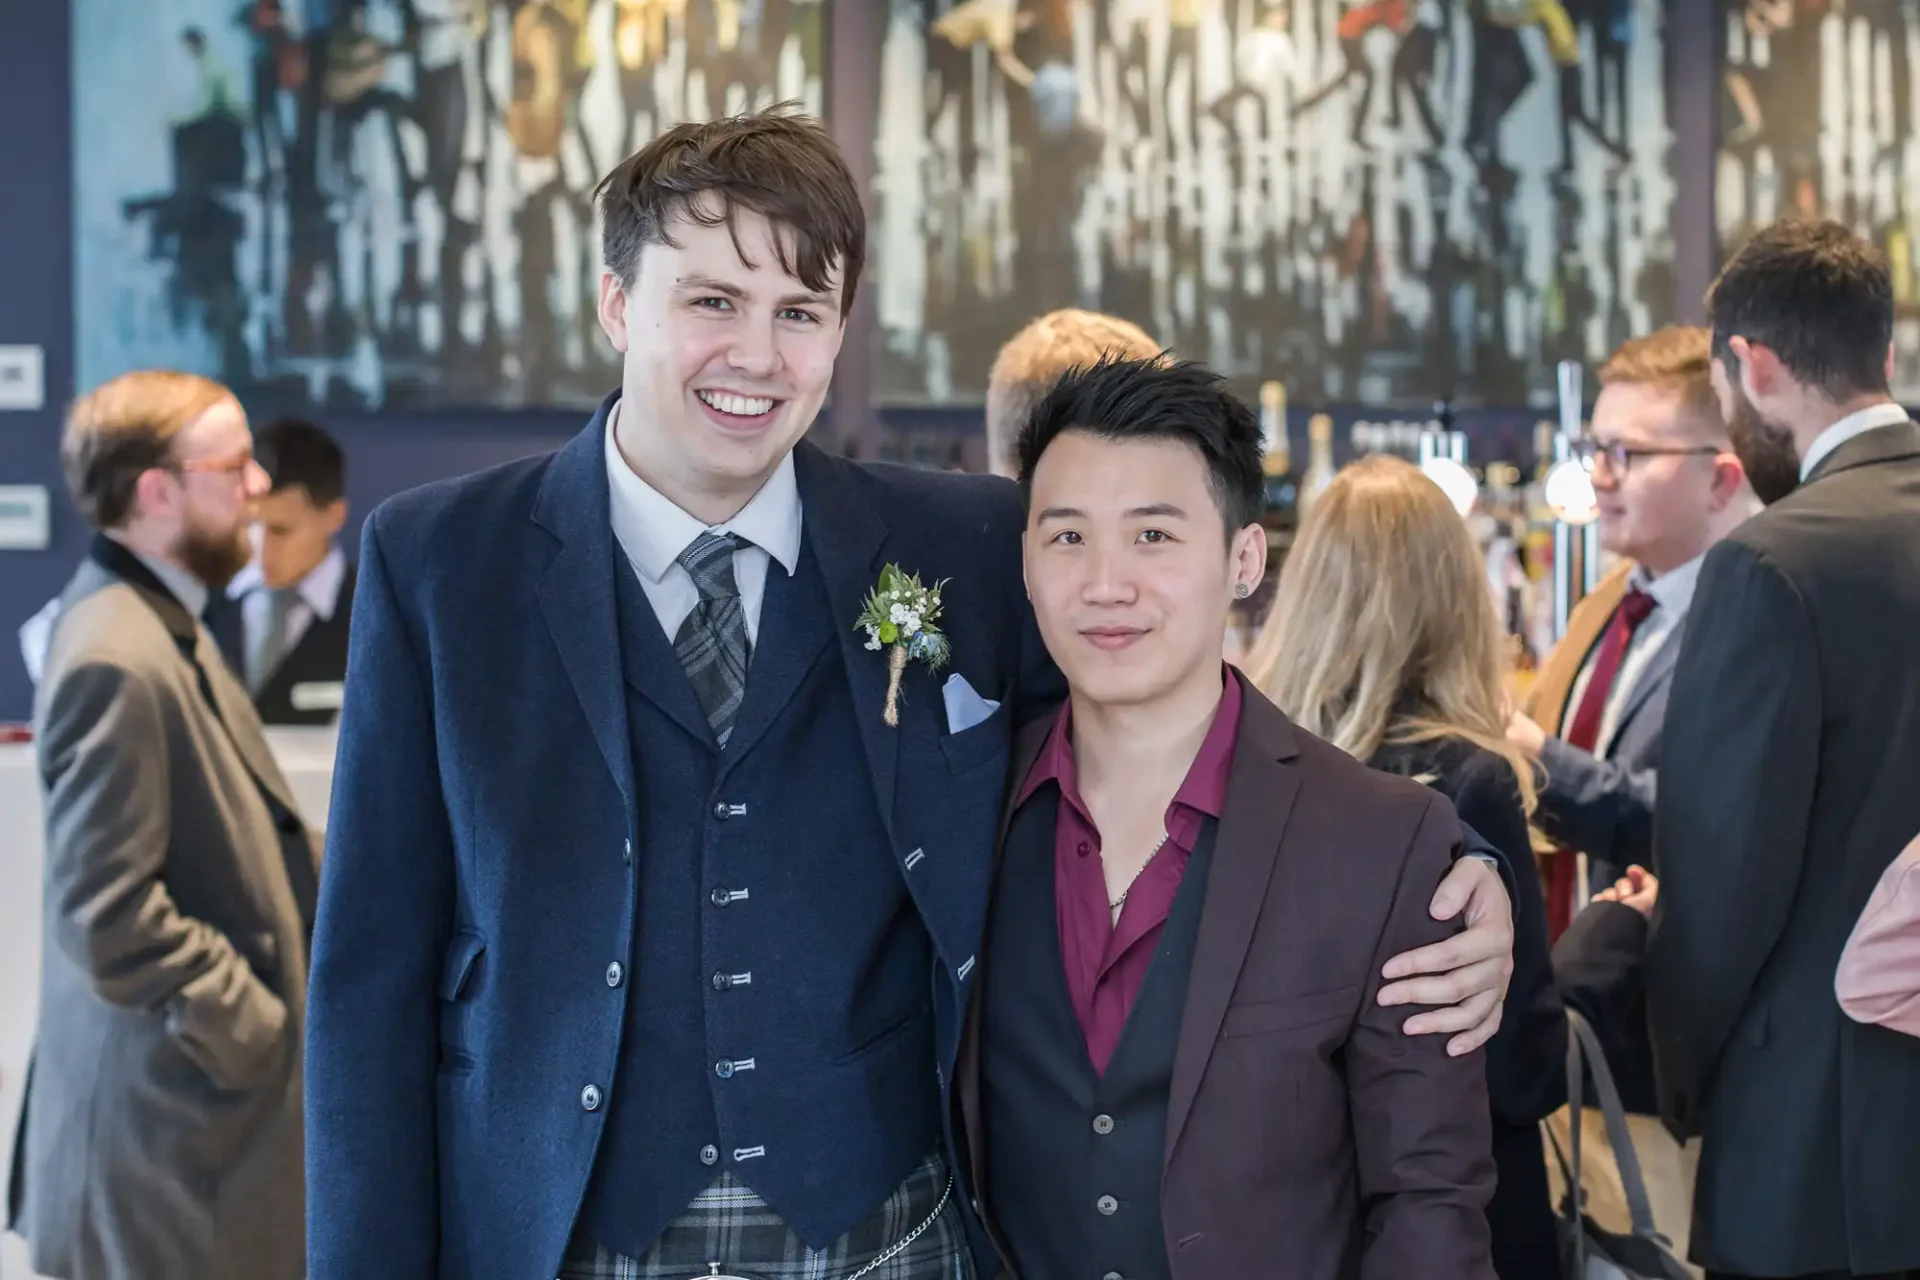 Two men smiling at a formal event, one wearing a traditional kilt and the other in a maroon jacket, with guests in the background.